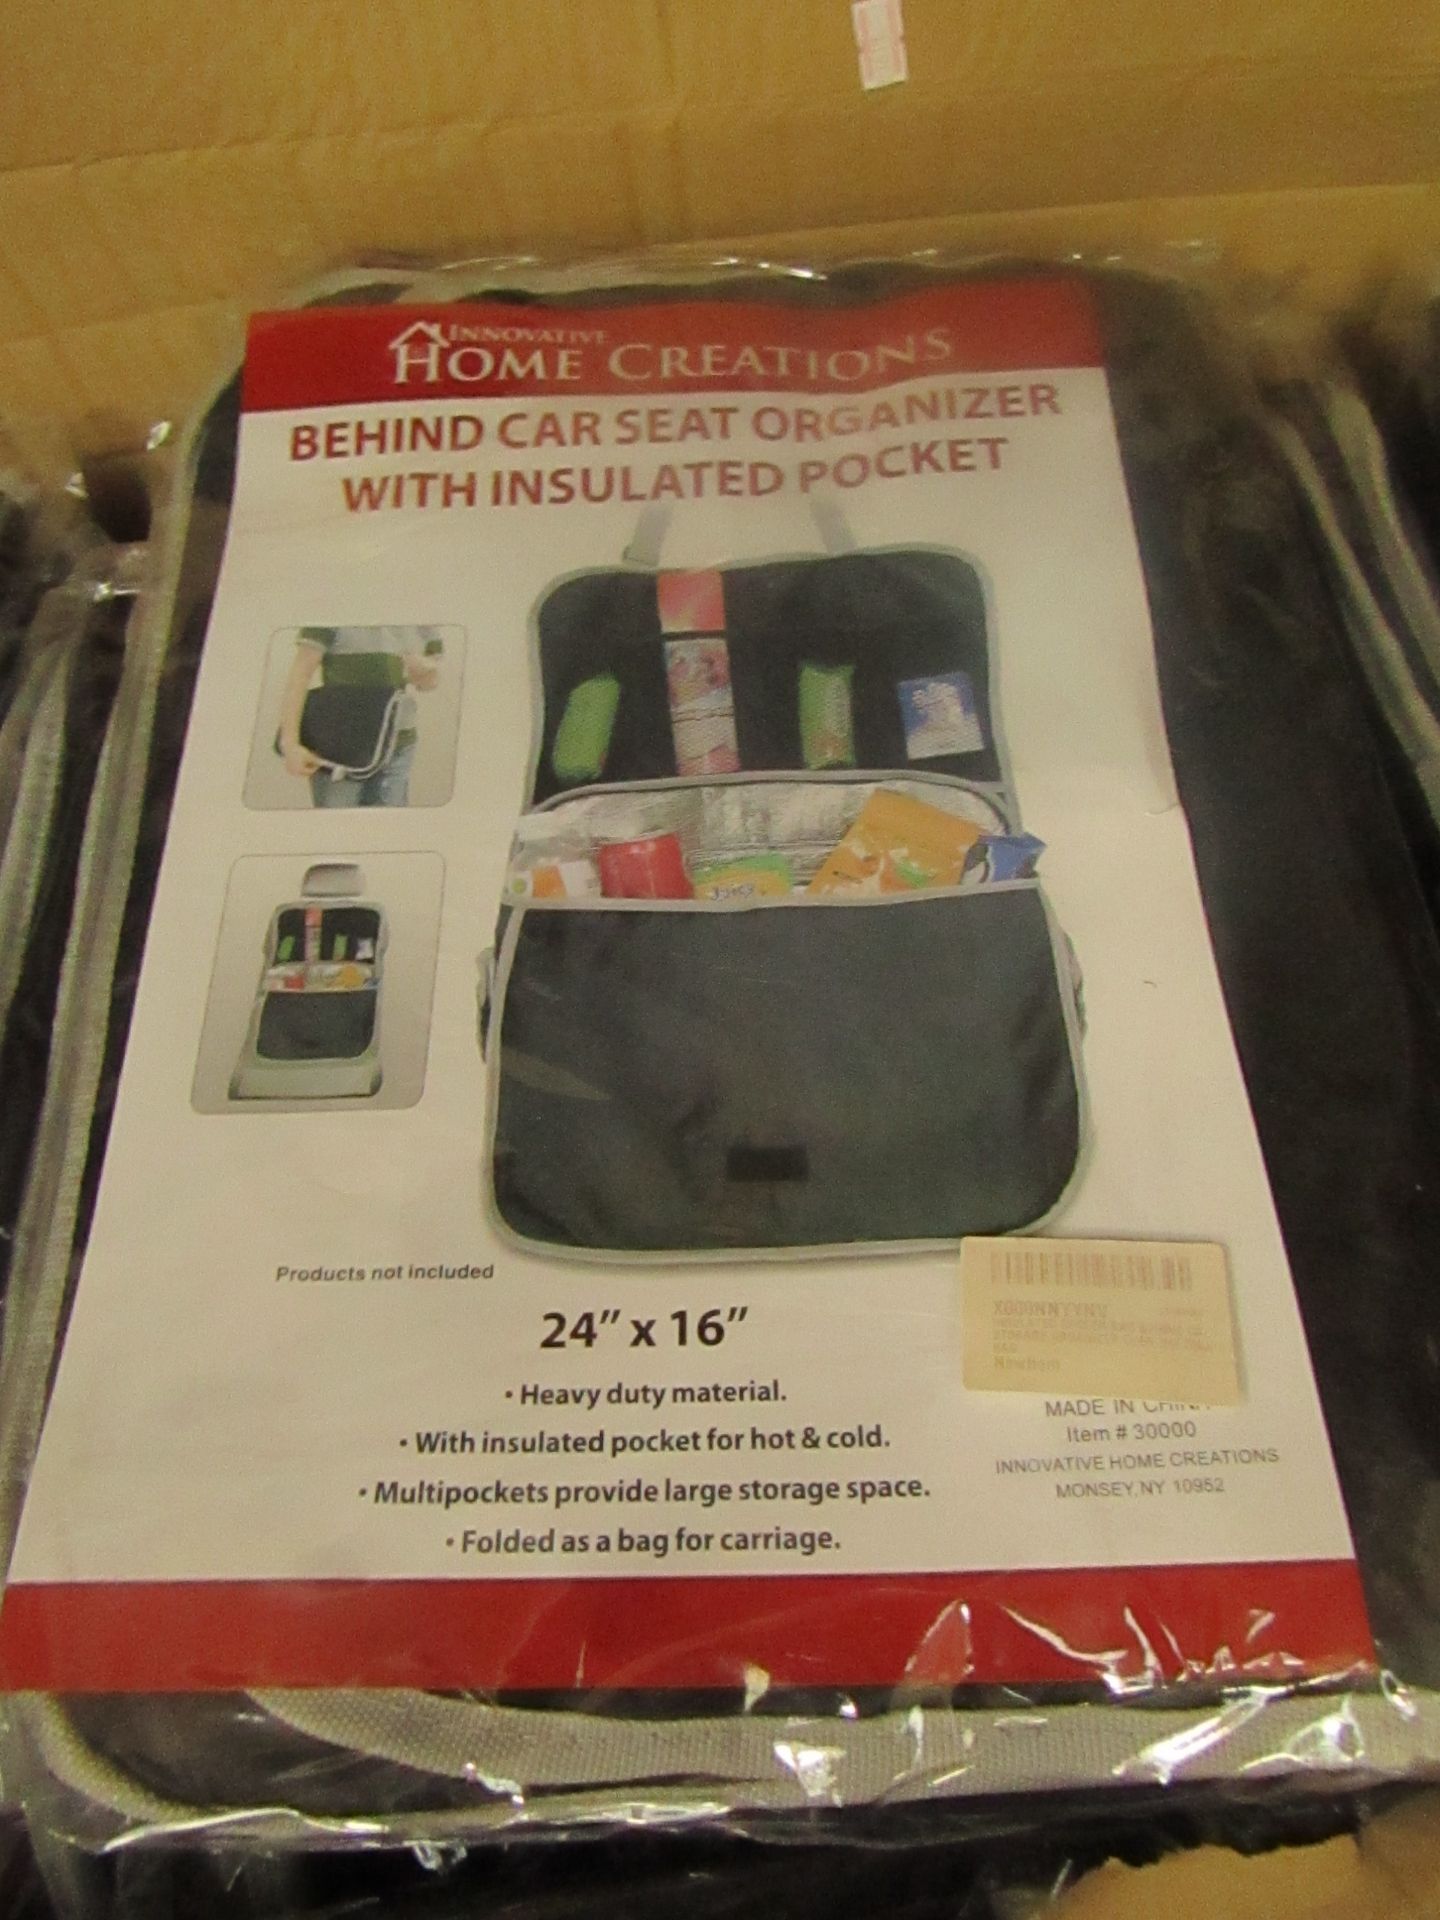 2X Home creations - behind car seat organizer with insulated pocket, all packaged. RRP Circa £8.99